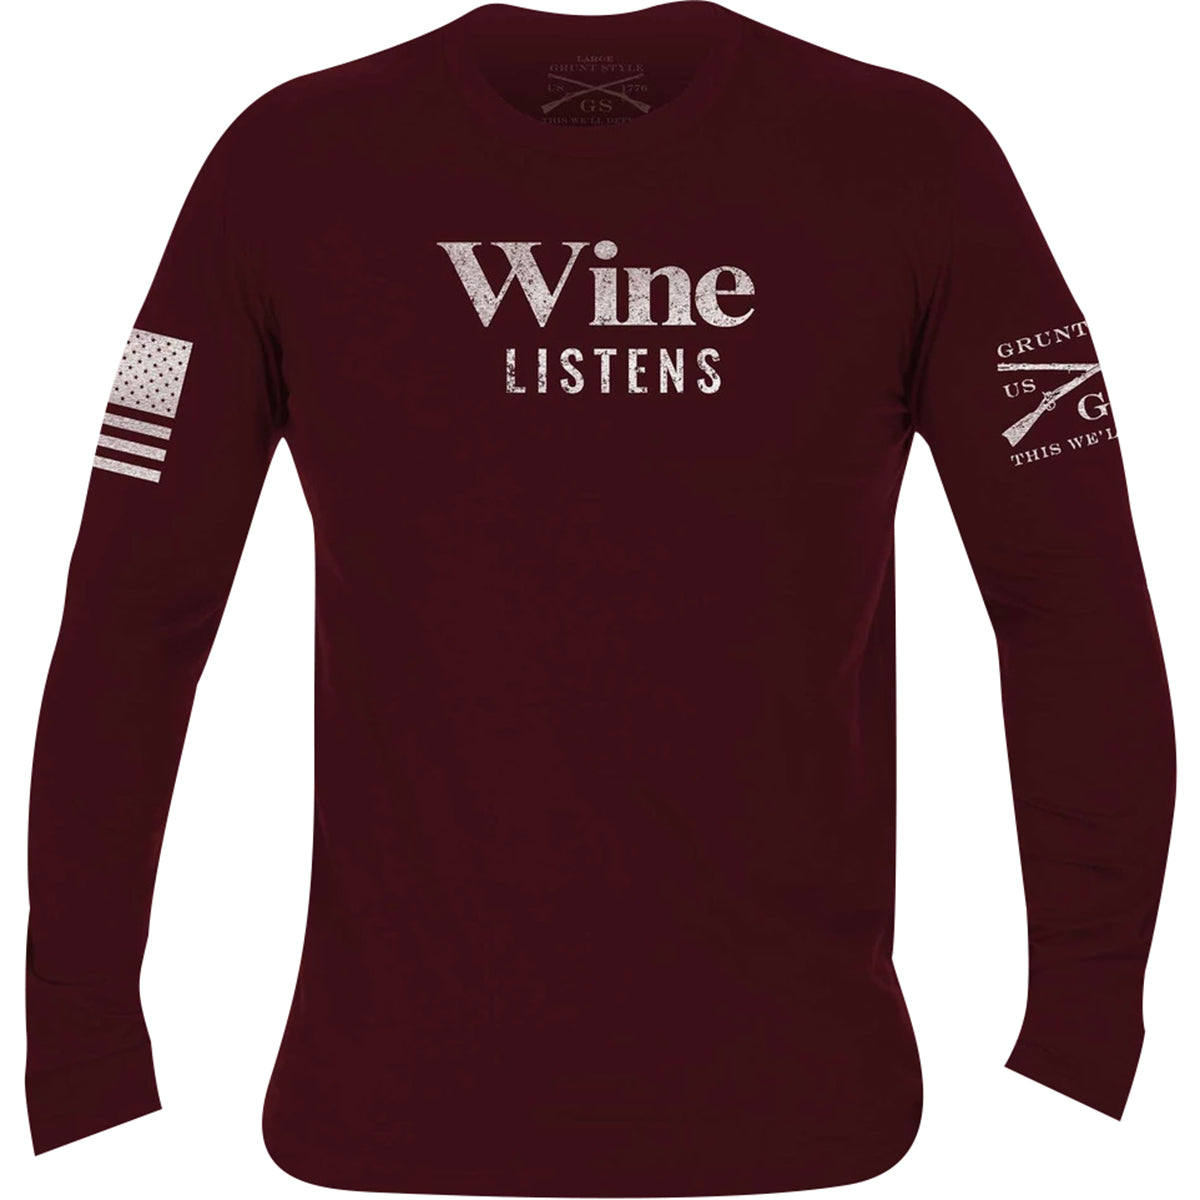 Grunt Style Women's Relaxed Fit Wine Listens Long Sleeve T-Shirt - Wine Grunt Style